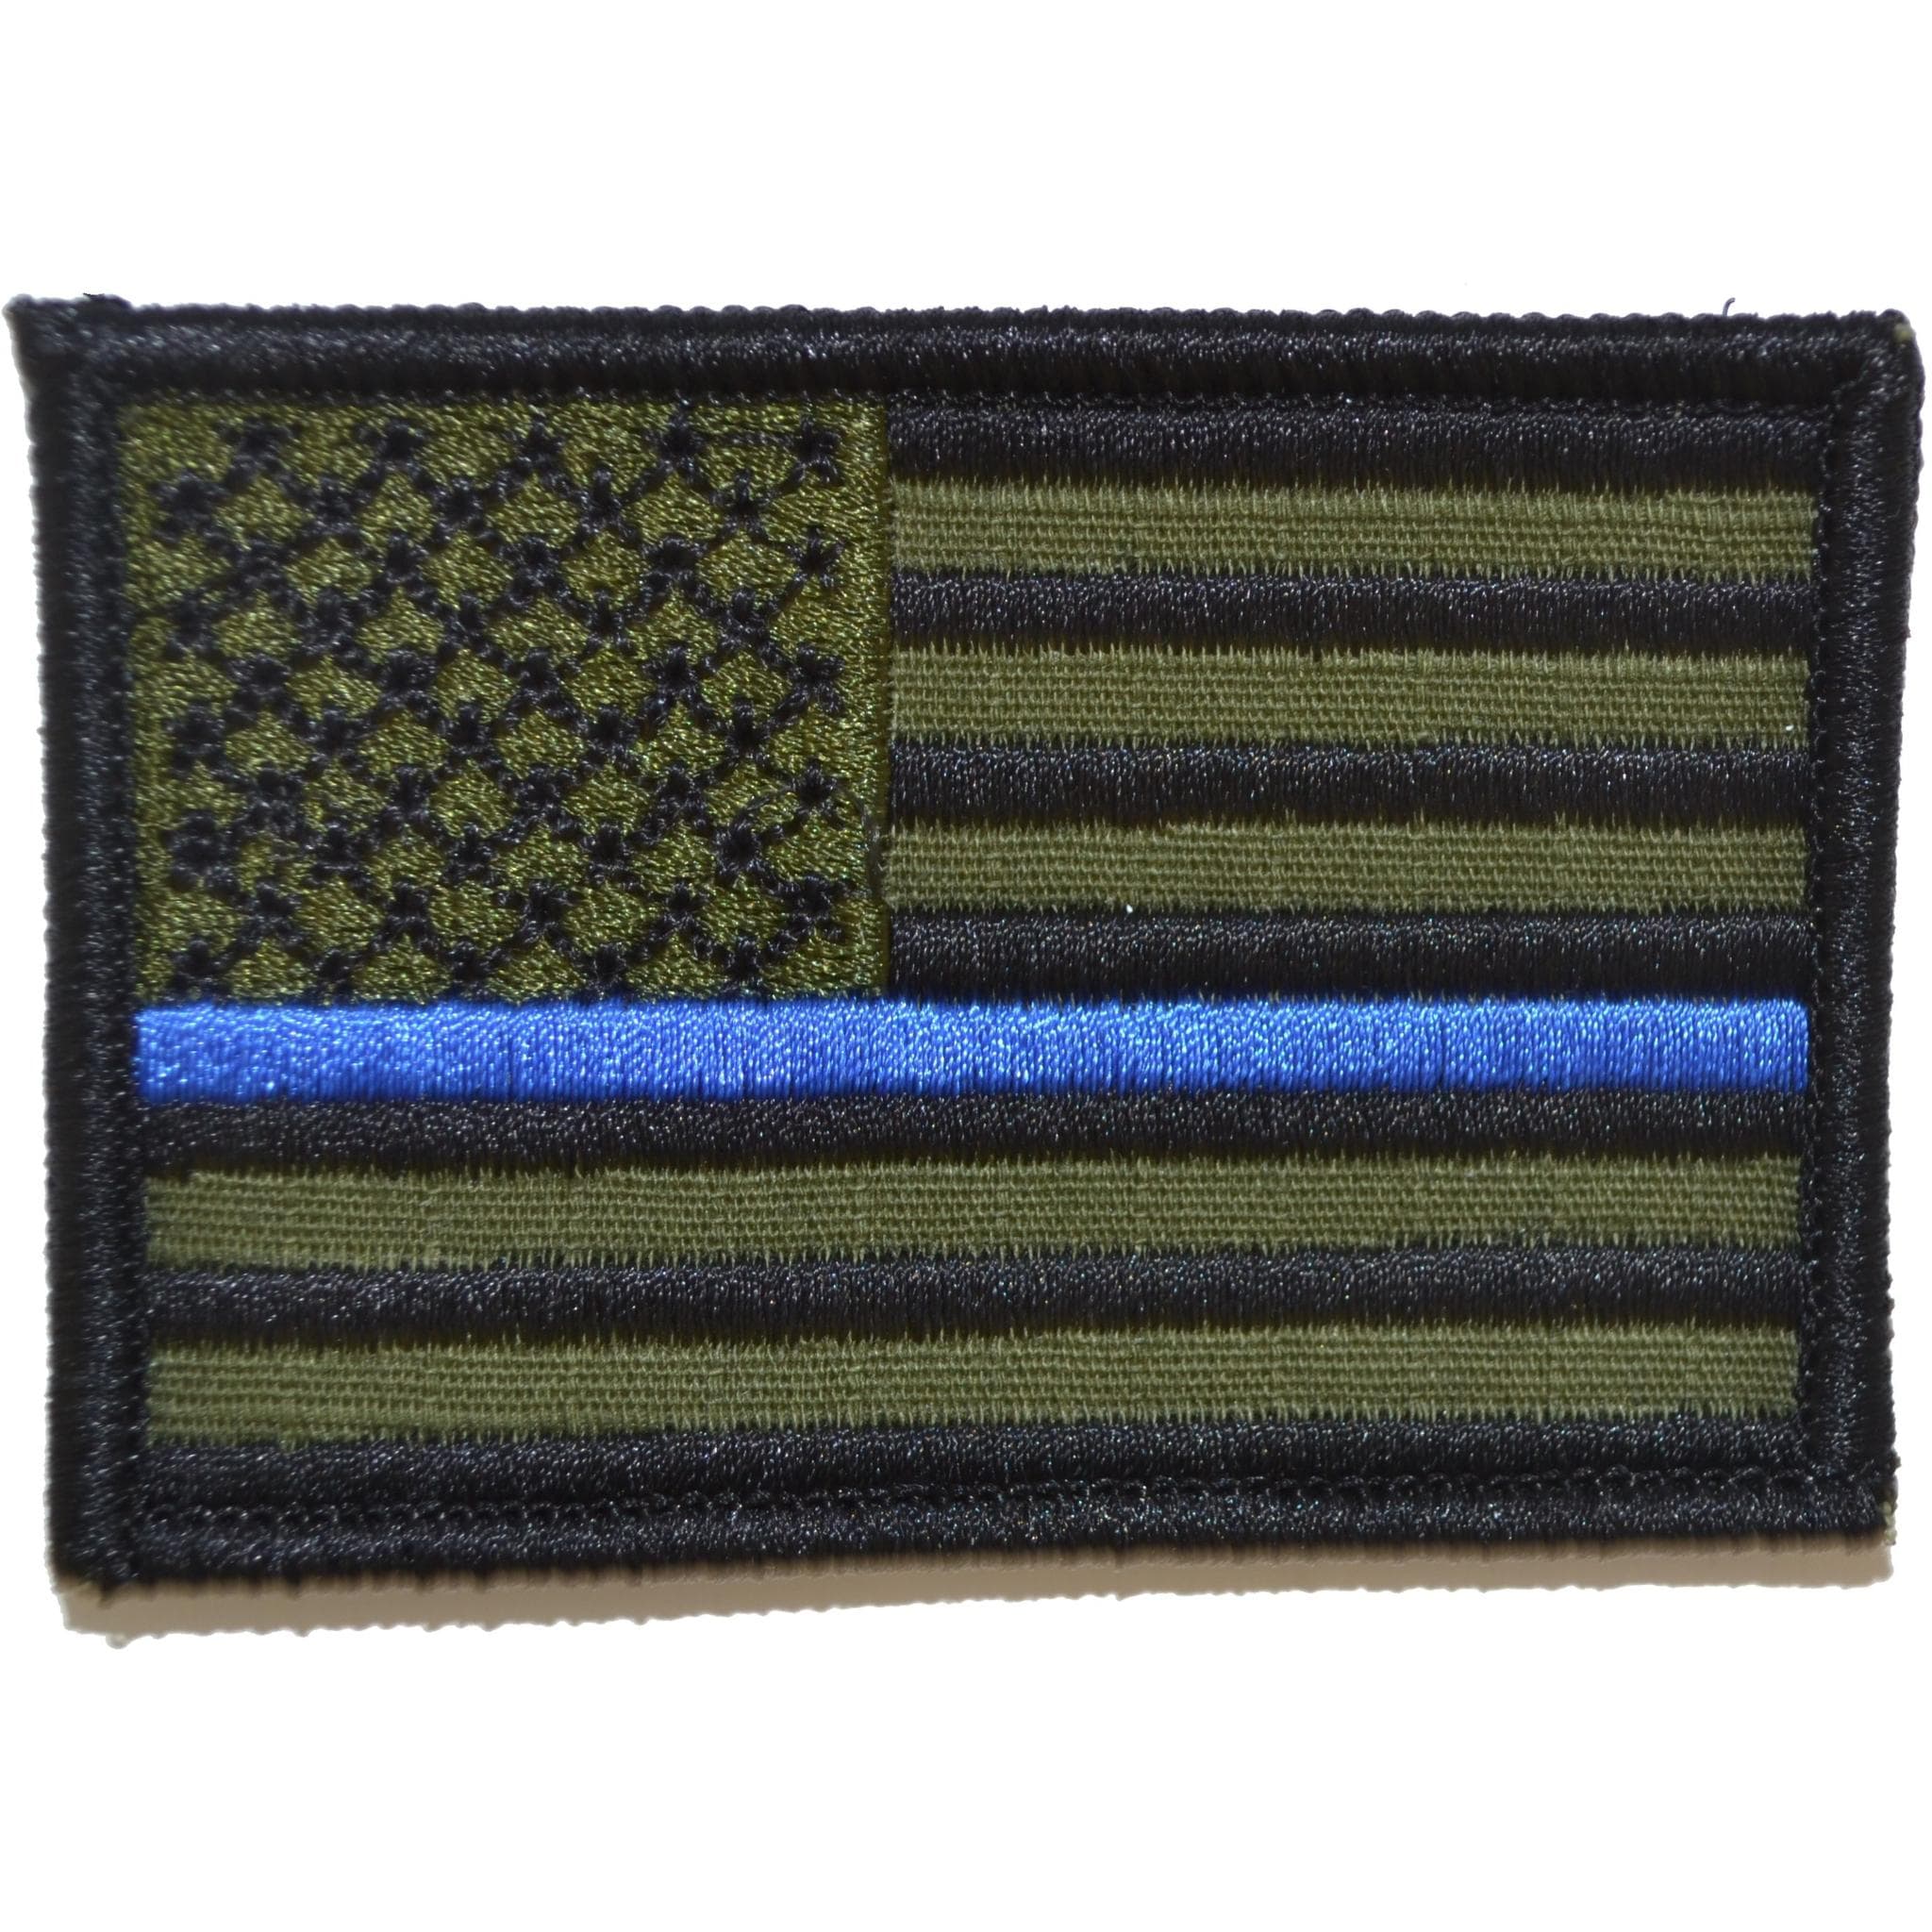 Tactical Gear Junkie Patches Olive Drab Thin Blue Line American Flag - 2x3 Hat Patch